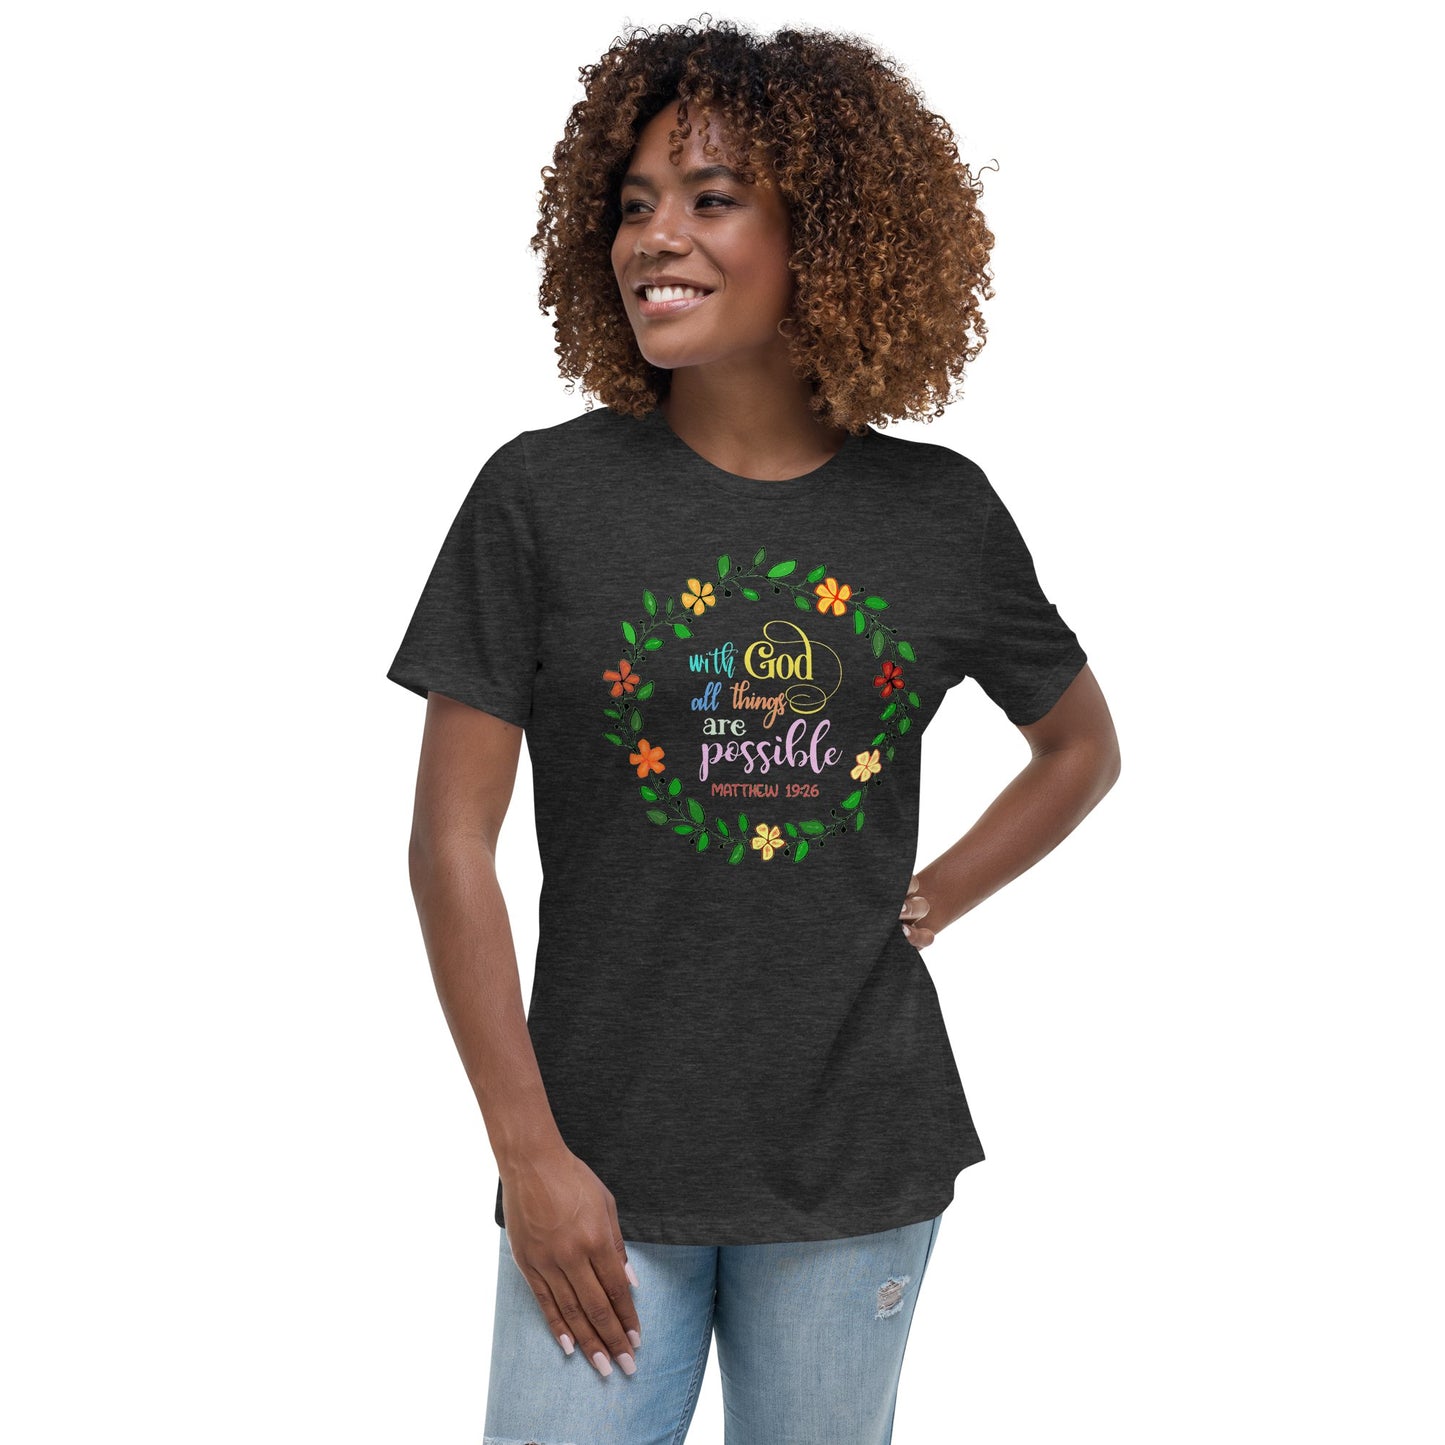 With God all things are possible Relaxed T-Shirt - Blue Cava